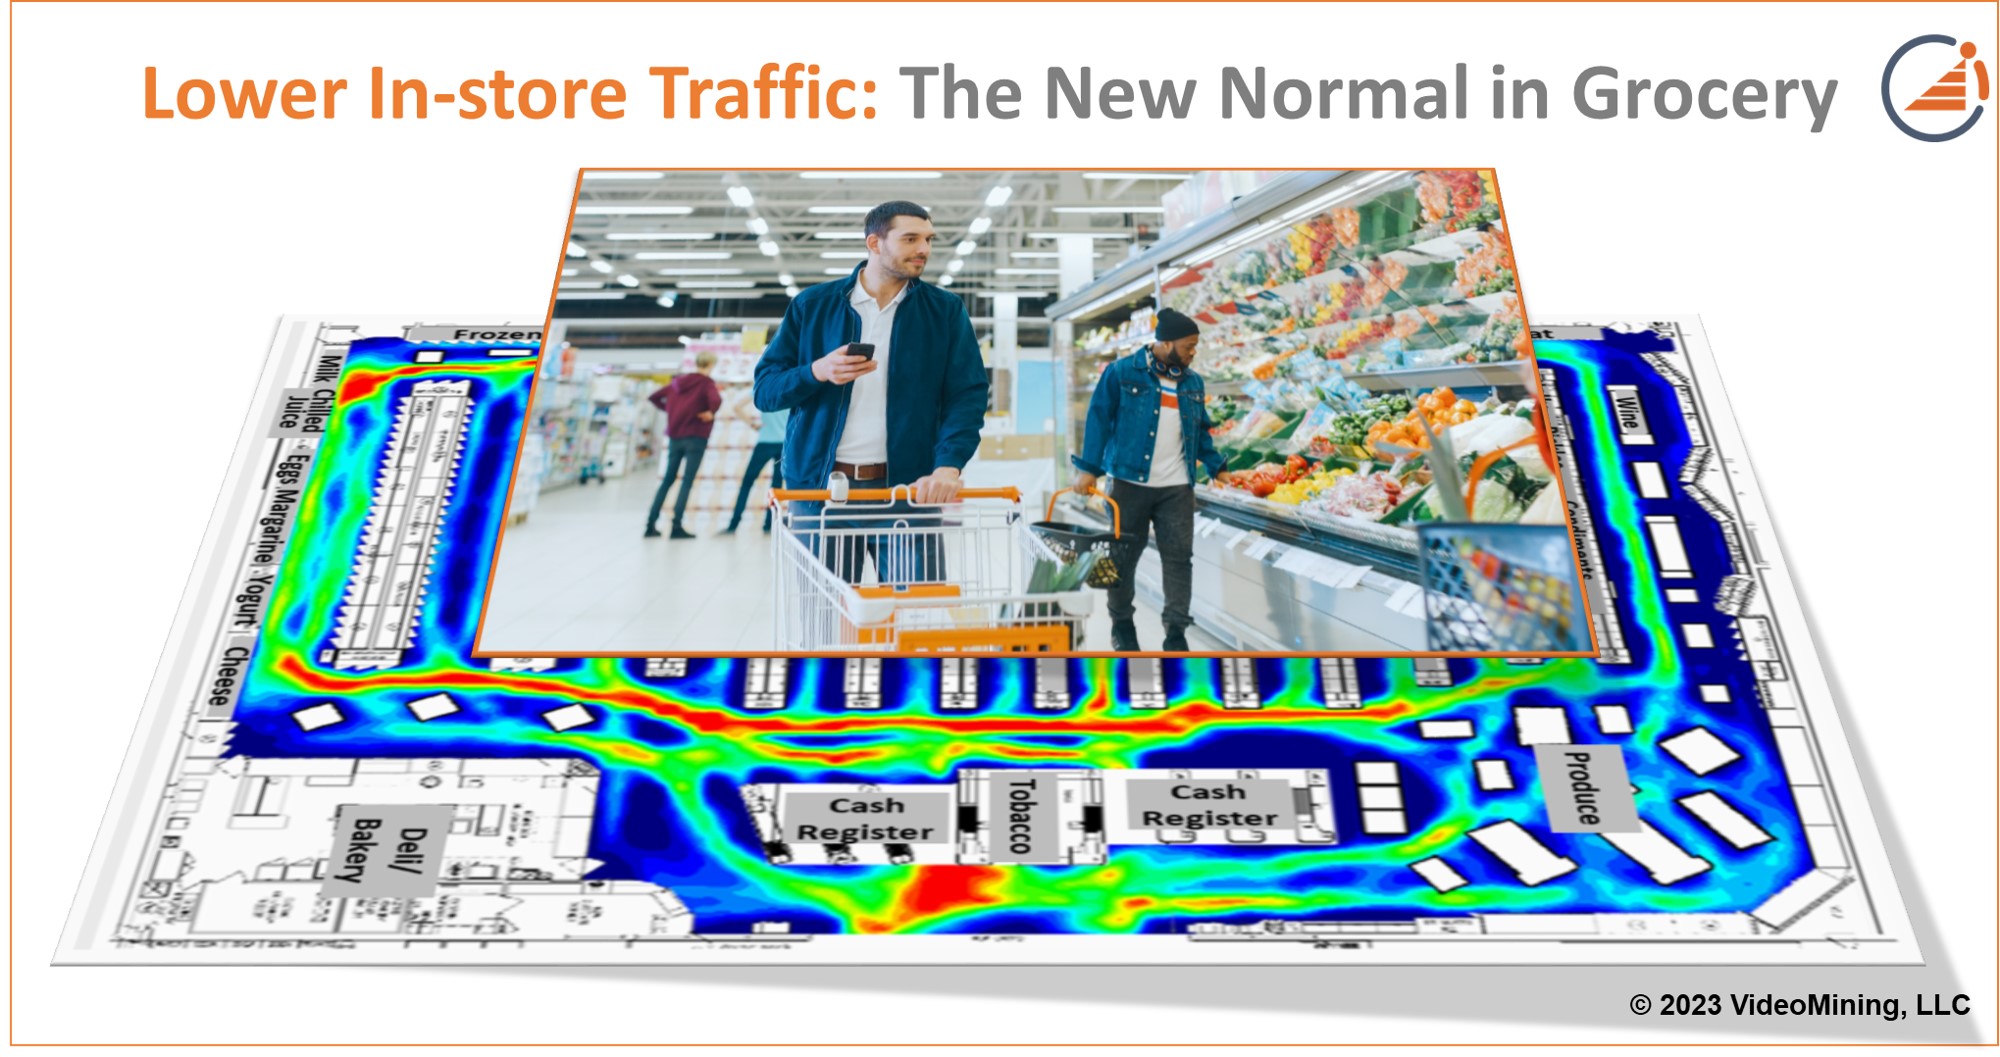 Lower In-store Traffic: The New Normal in Grocery